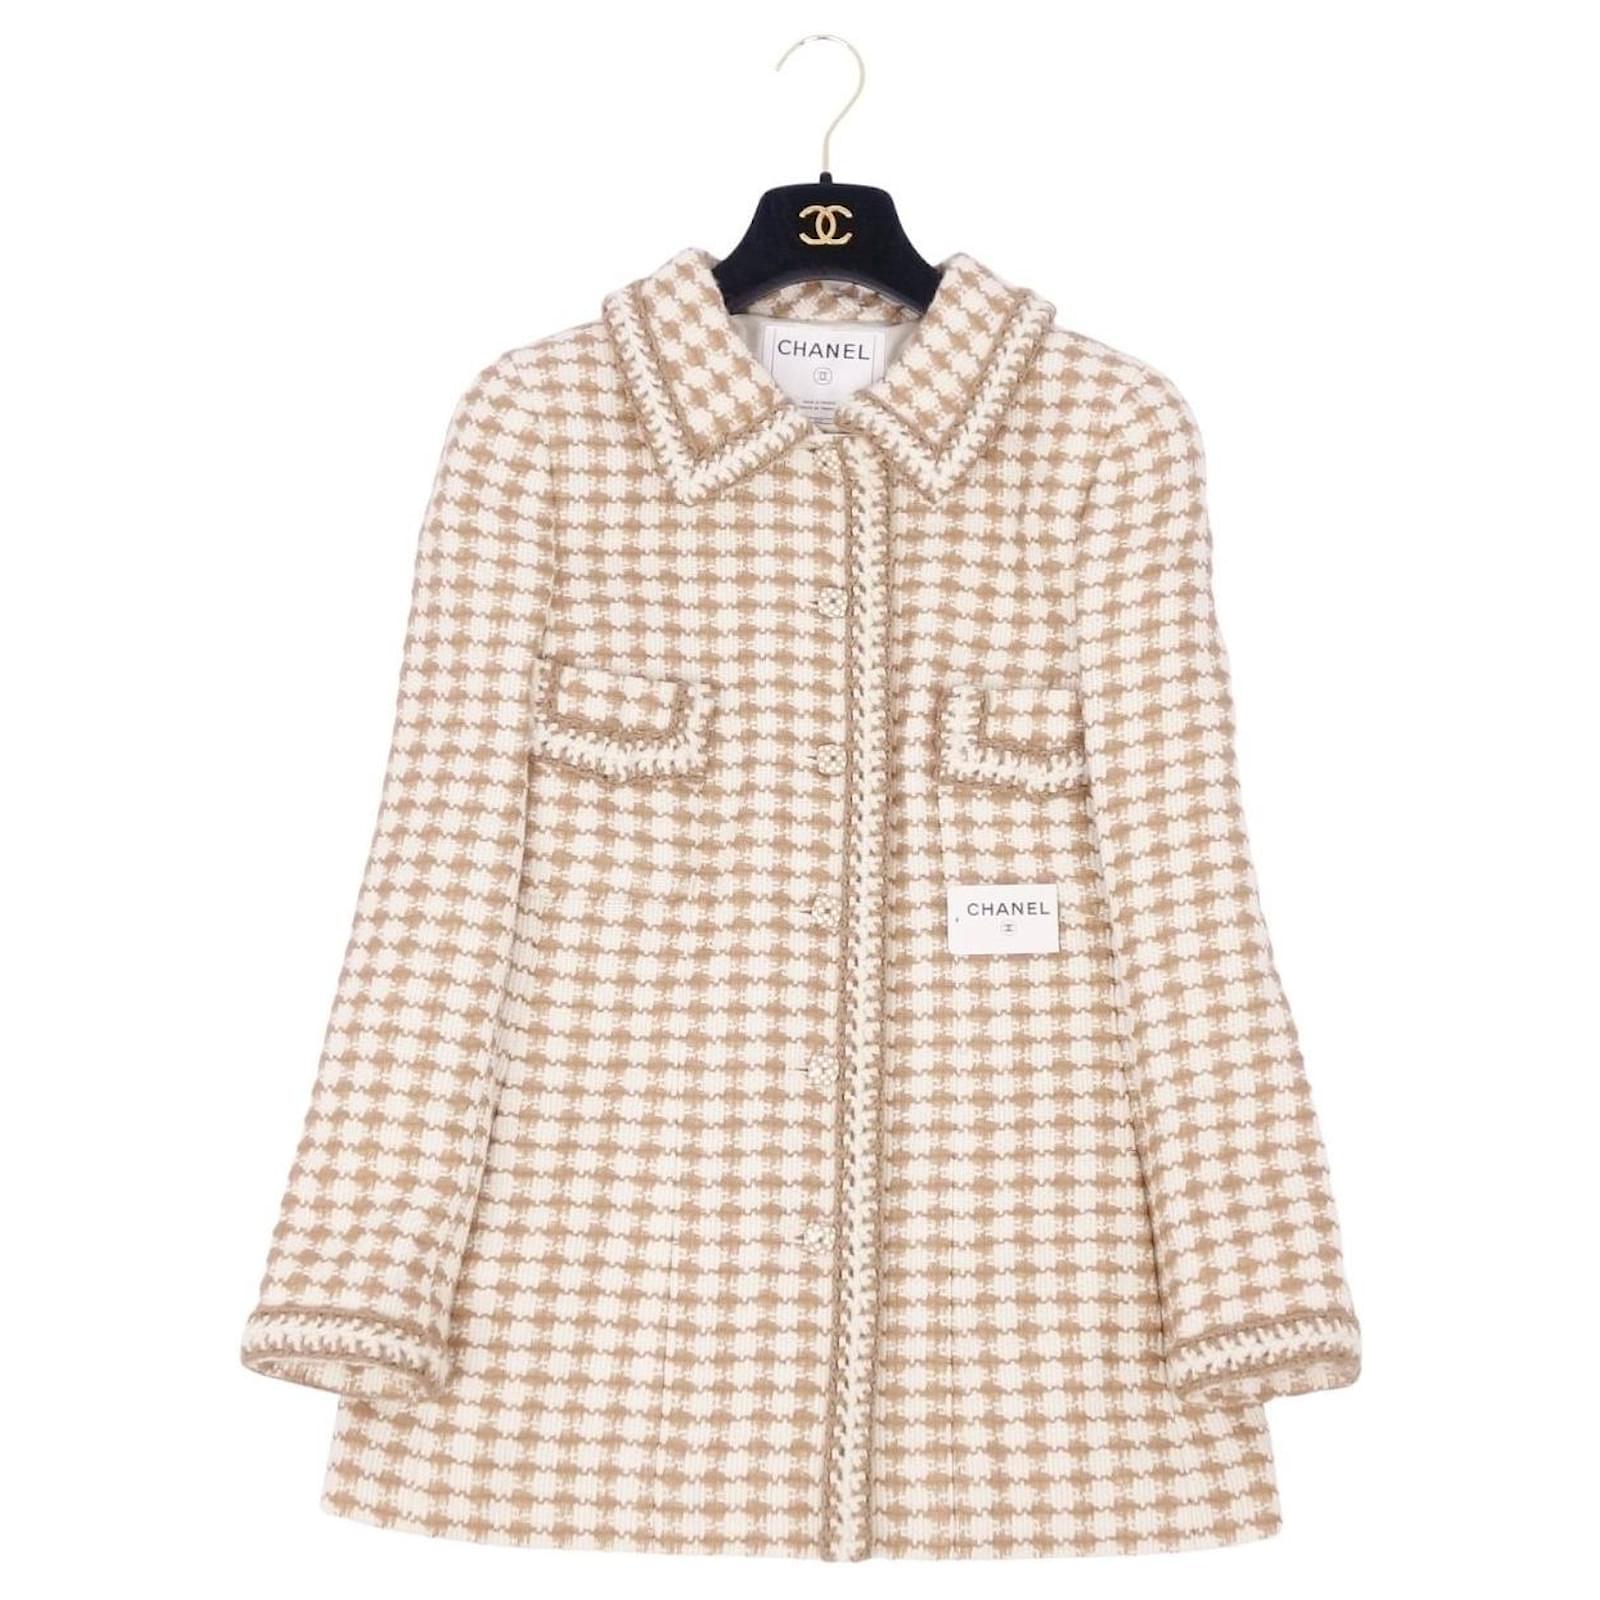 Used] Vintage Chanel Jacket Coco Mark Tweed Knit Piping Wool